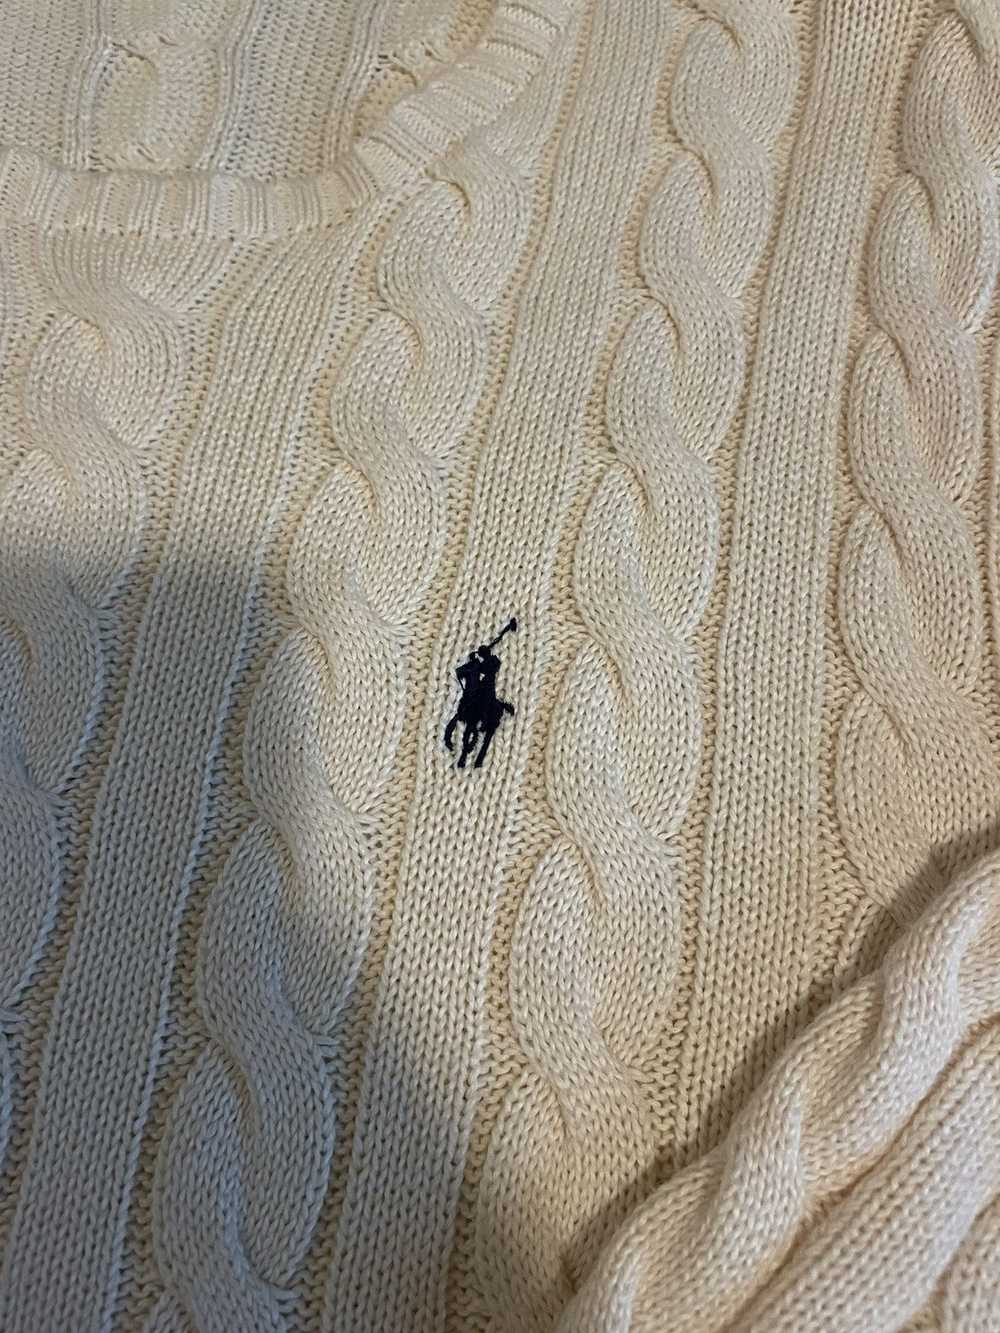 Polo Ralph Lauren Cable Knit Sweater Size M - image 2